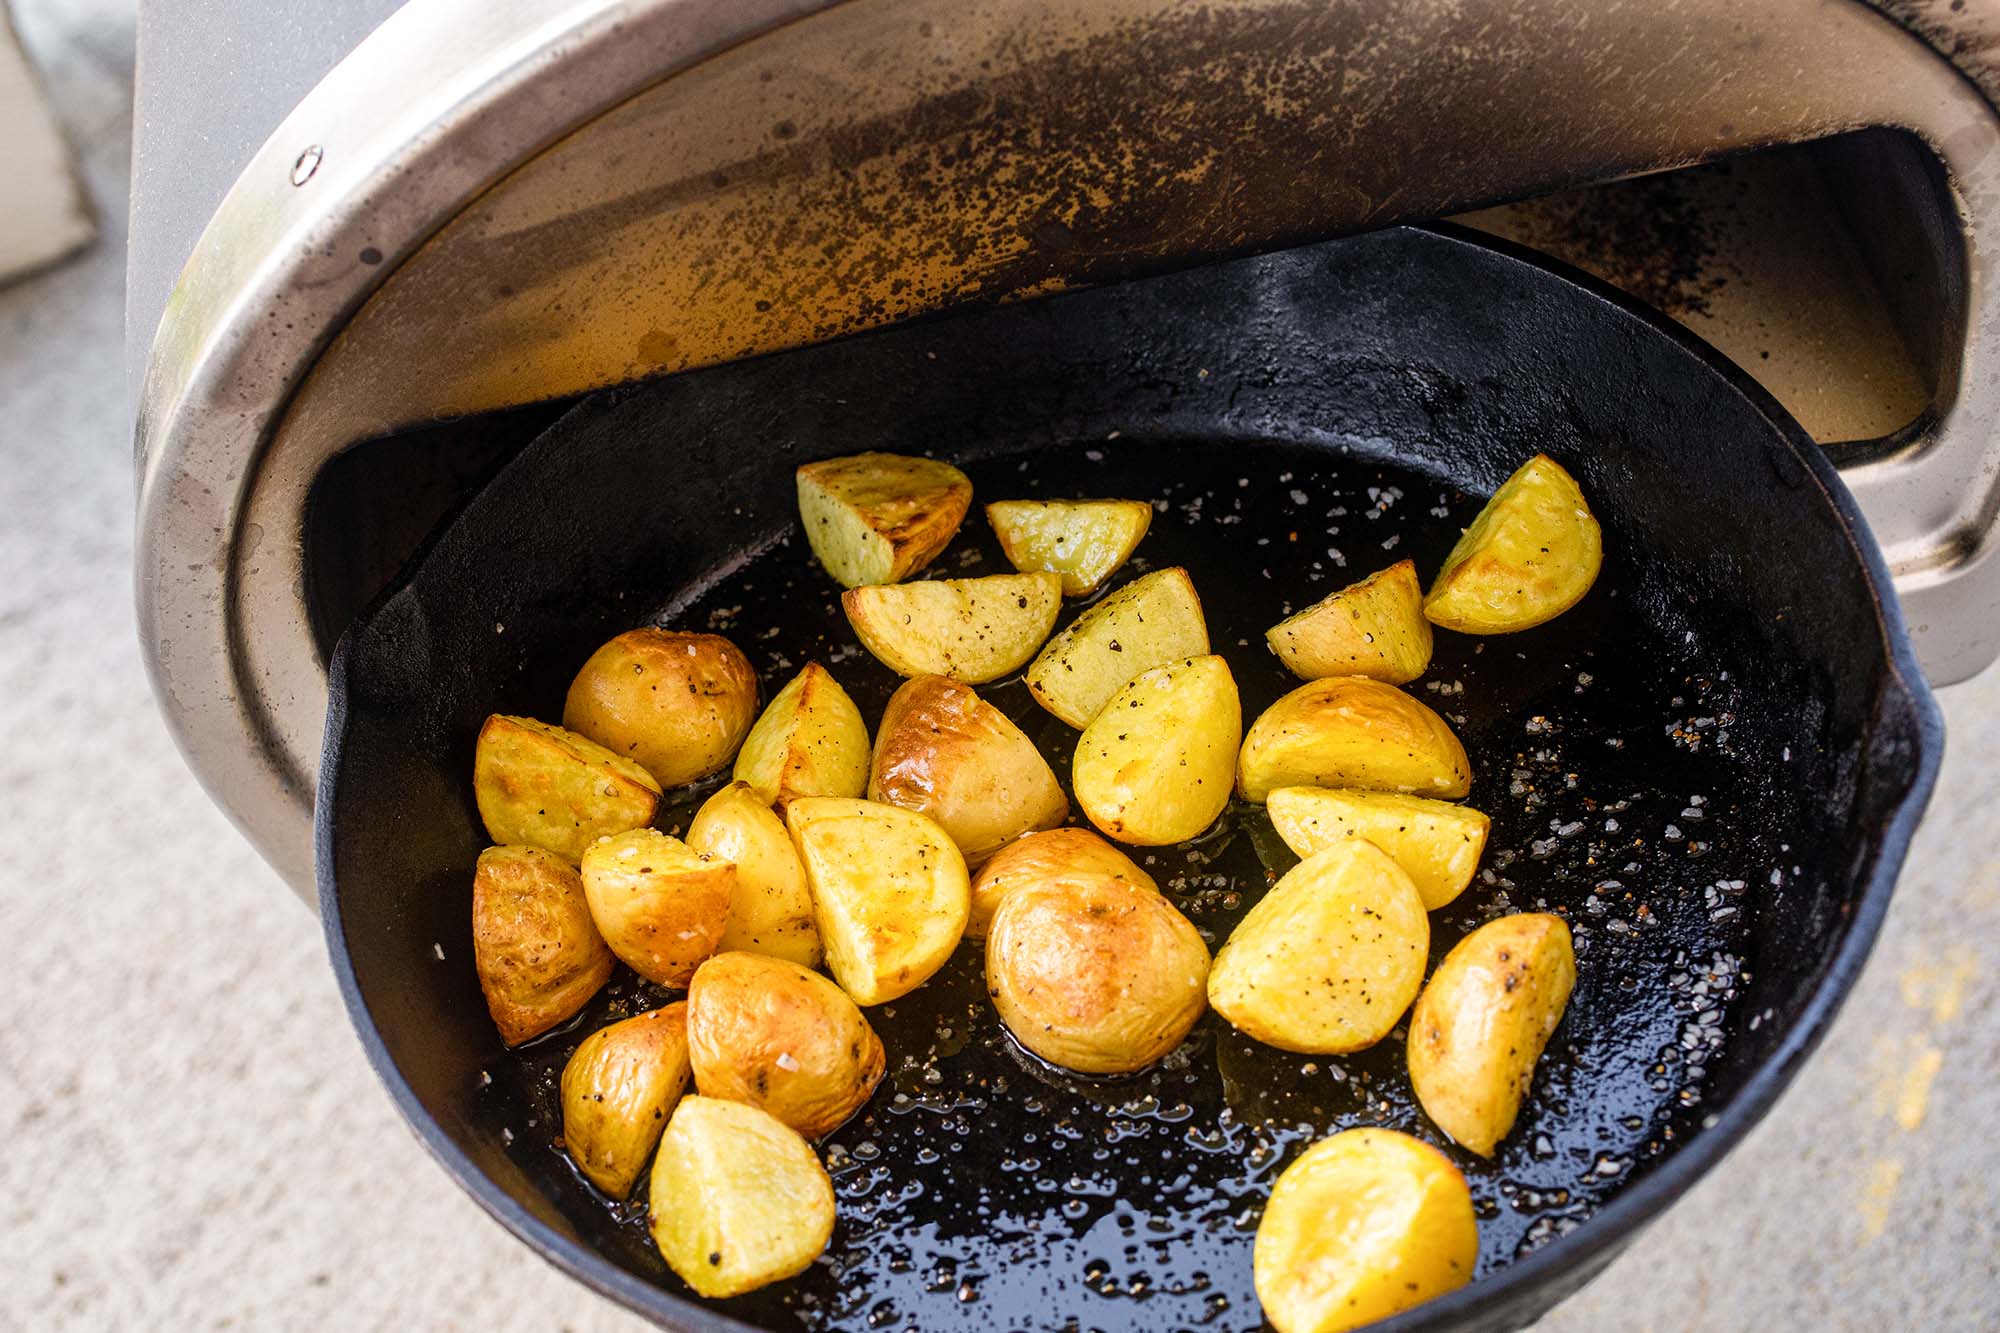 Cast iron skillet of quartered yukon gold potatoes cooked in a Roccbox.